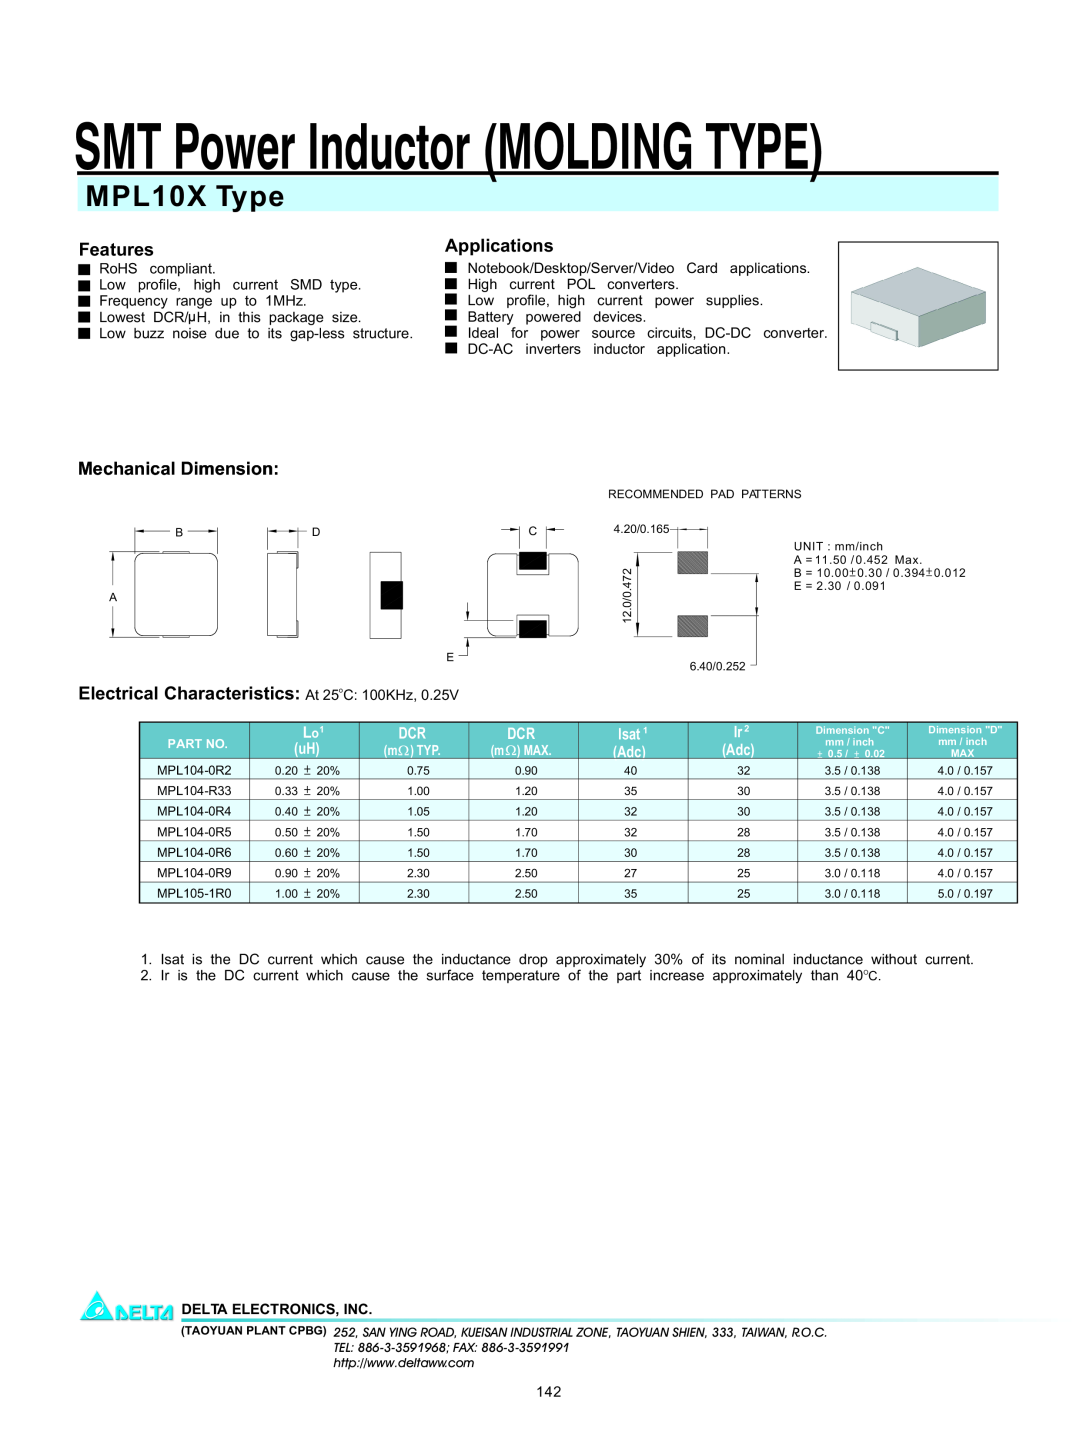 Delta Electronics manual SMT Power Inductor MOLDING TYPE, MPL10X Type, Features, Mechanical Dimension, Applications 